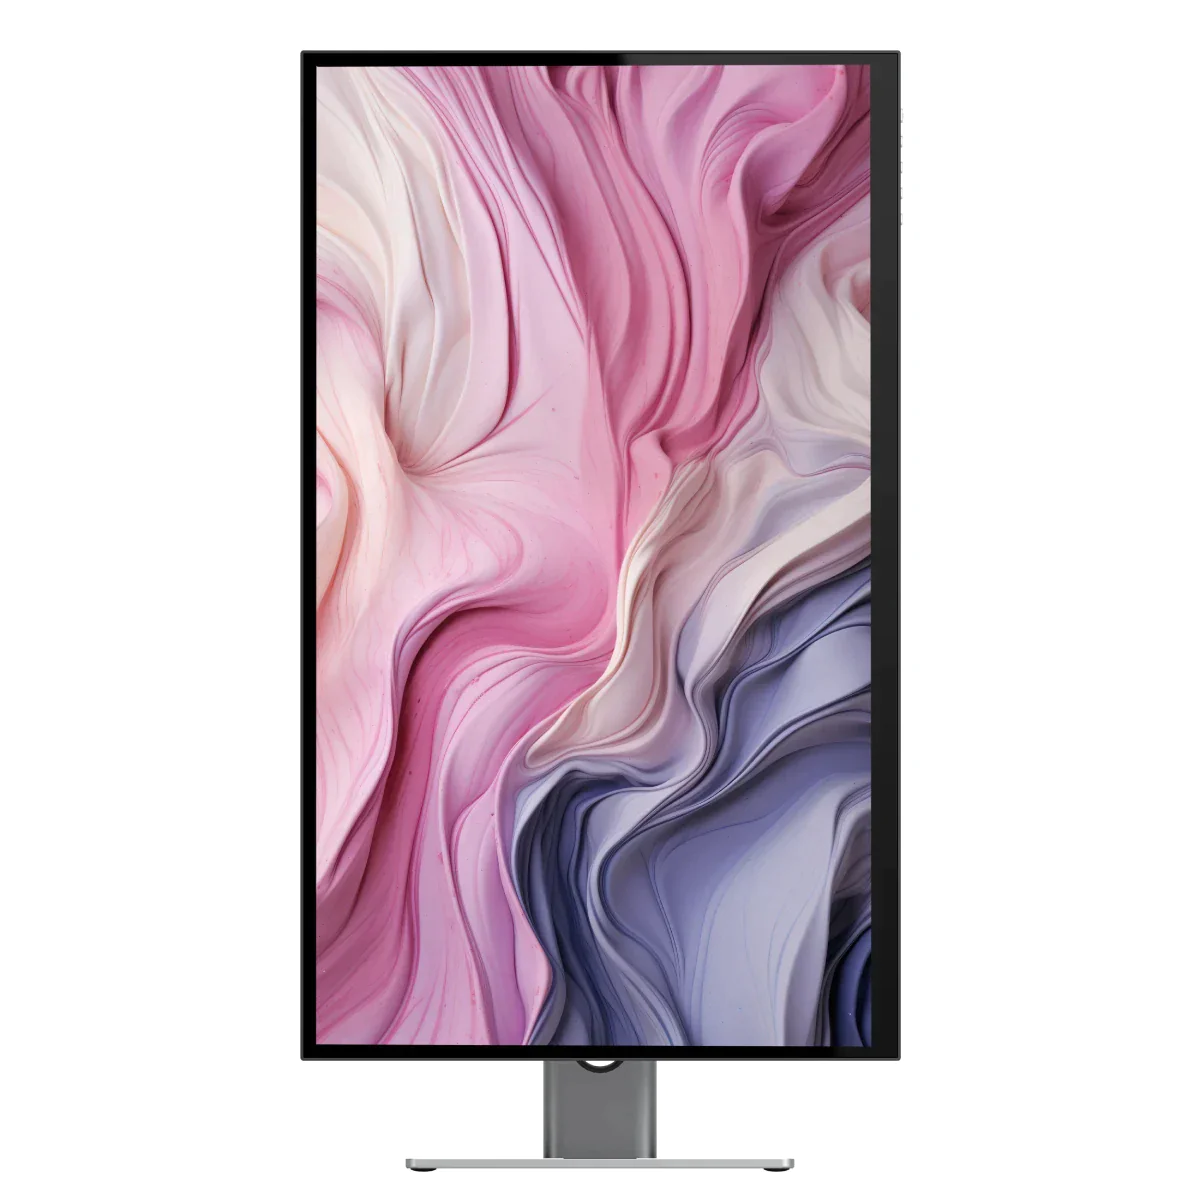 CLARITY 27" UHD 4K Monitor + Clarity Pro Touch 27" UHD 4K Monitor with 65W PD, Webcam and Touchscreen + DX2 Dual 4K Display Universal Docking Station “ with 65W Power Delivery